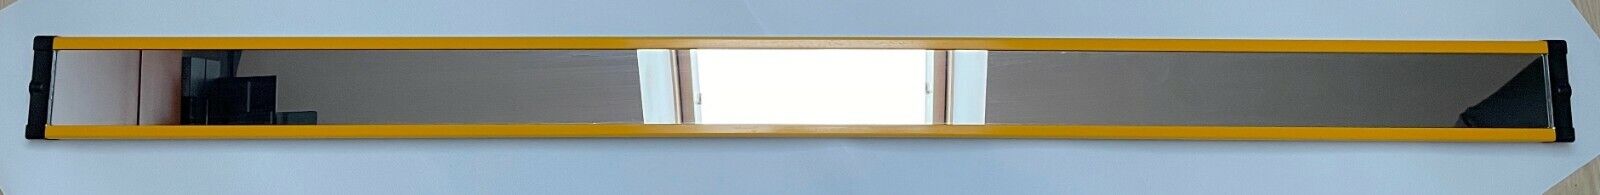 IFM EY1010 Quantity limited Finally popular brand MIRROR DEFLECTION